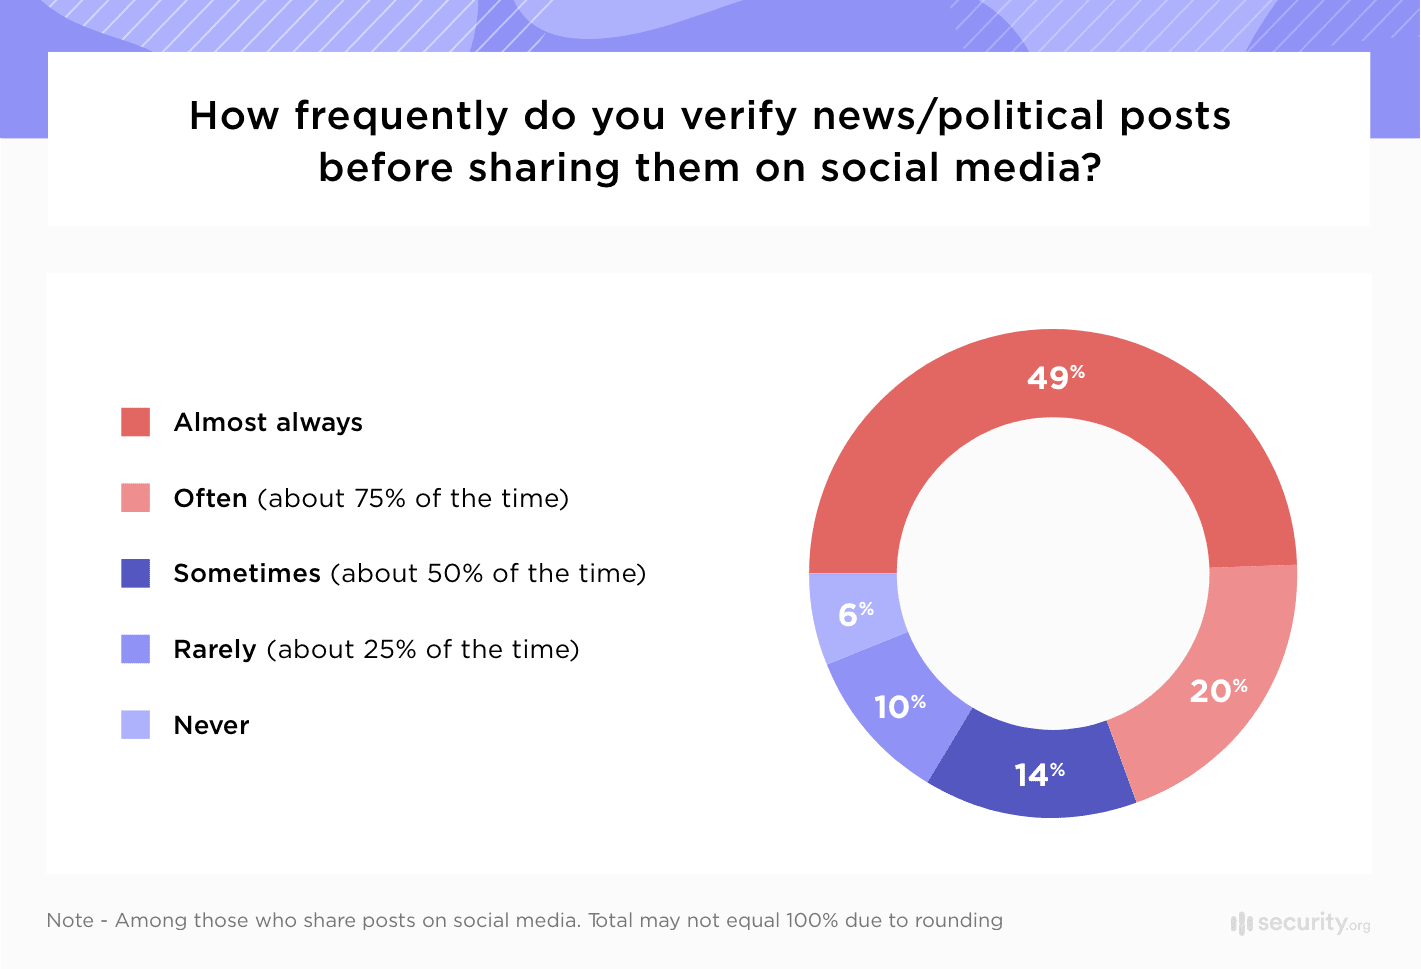 How frequently do you verify news or political posts before sharing them on social media